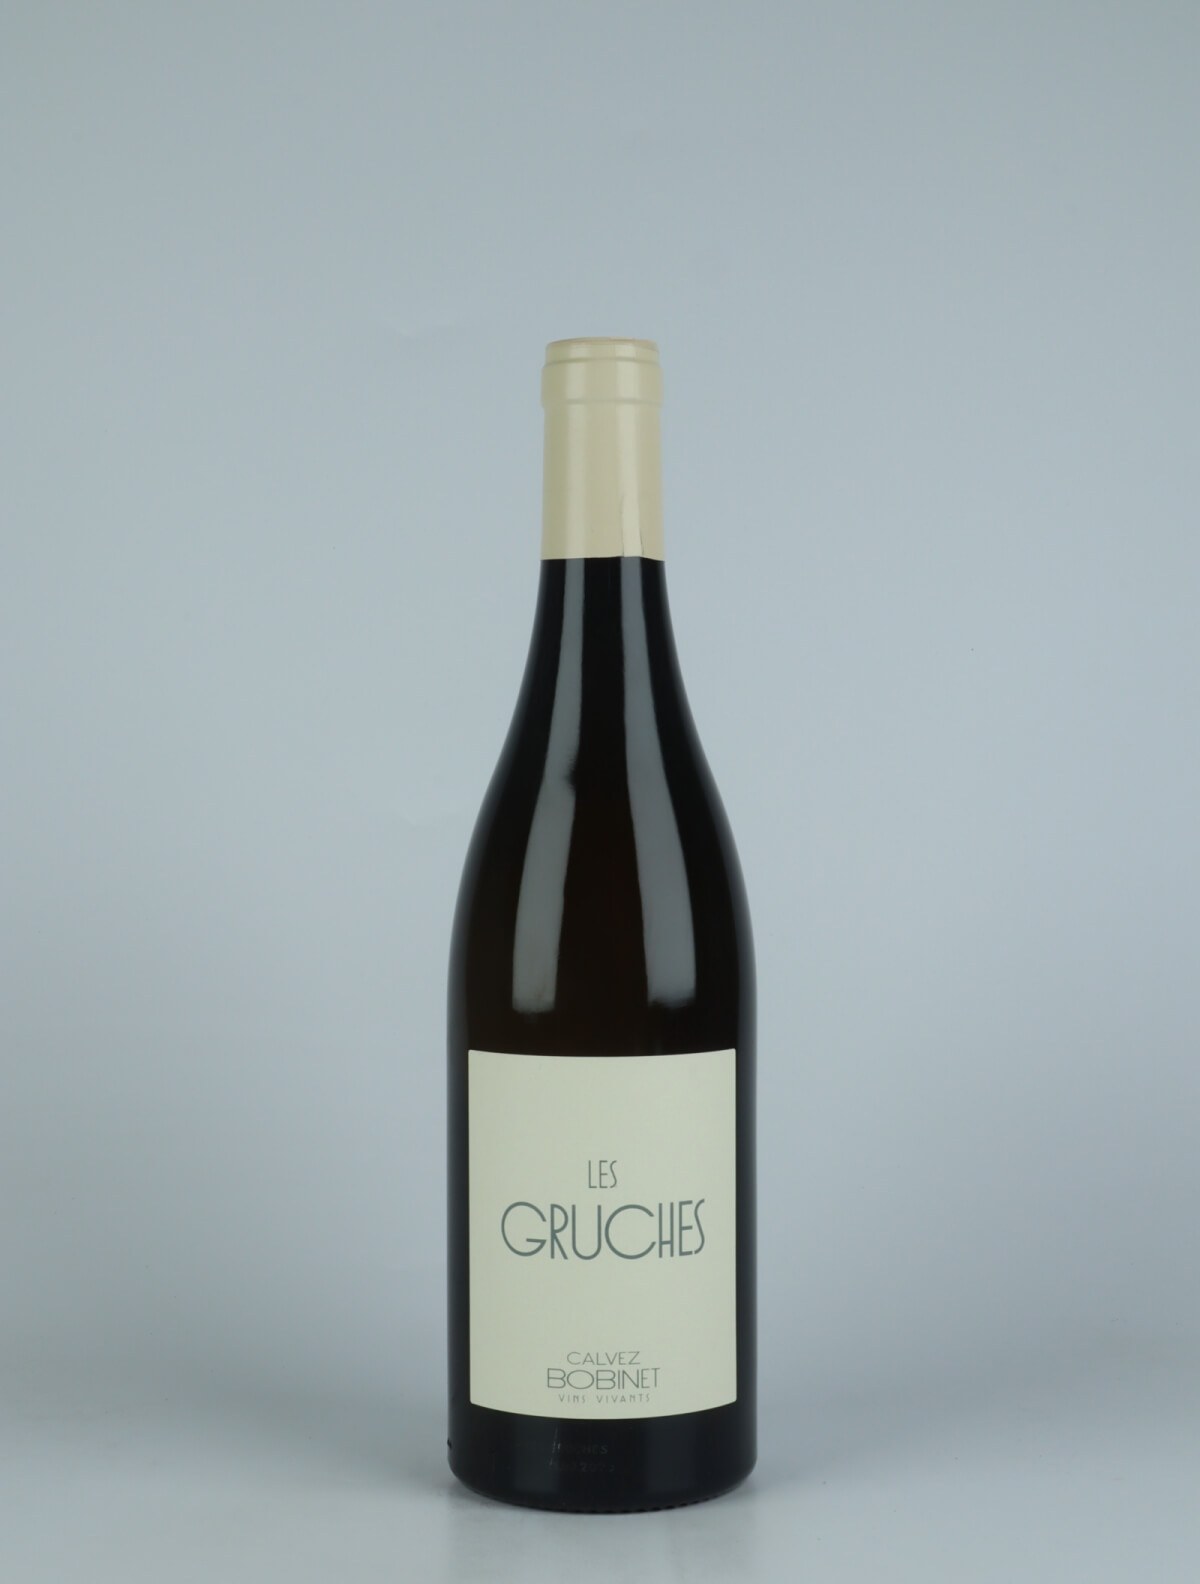 A bottle 2020 Saumur Blanc - Les Gruches White wine from Domaine Bobinet, Loire in France